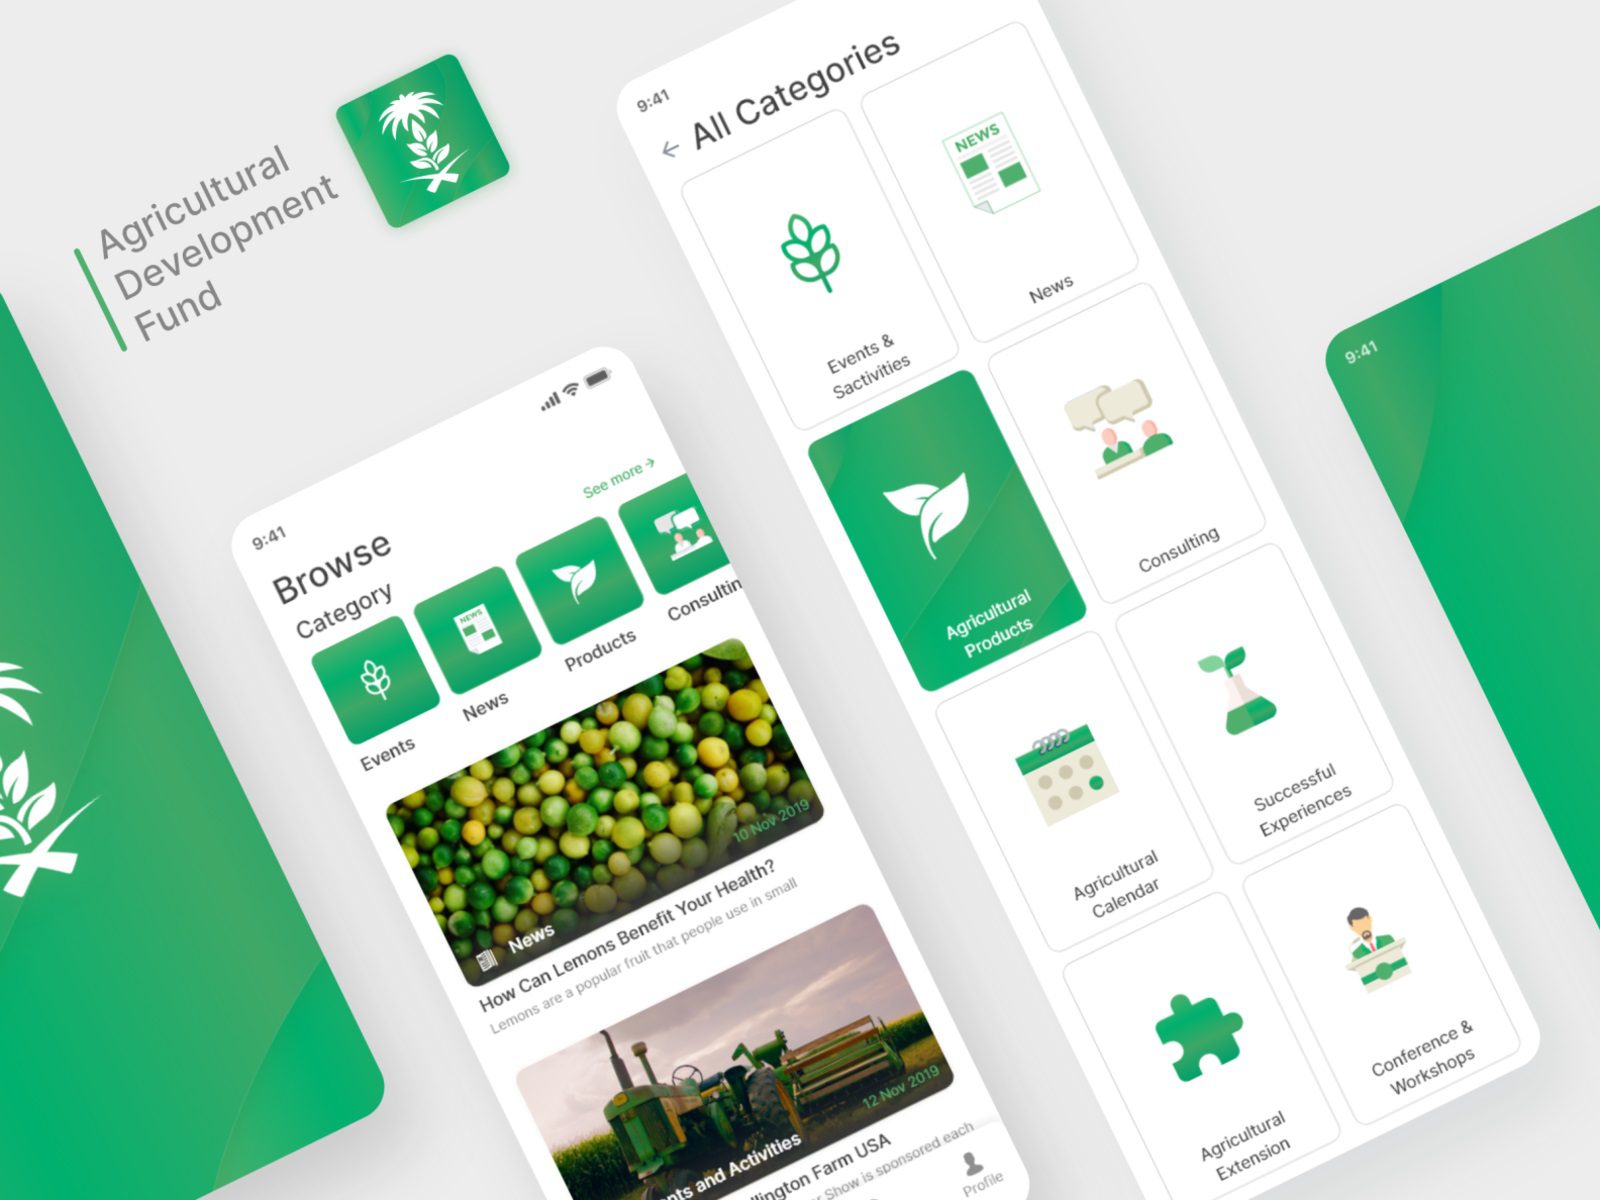 Developing agritech mobile apps